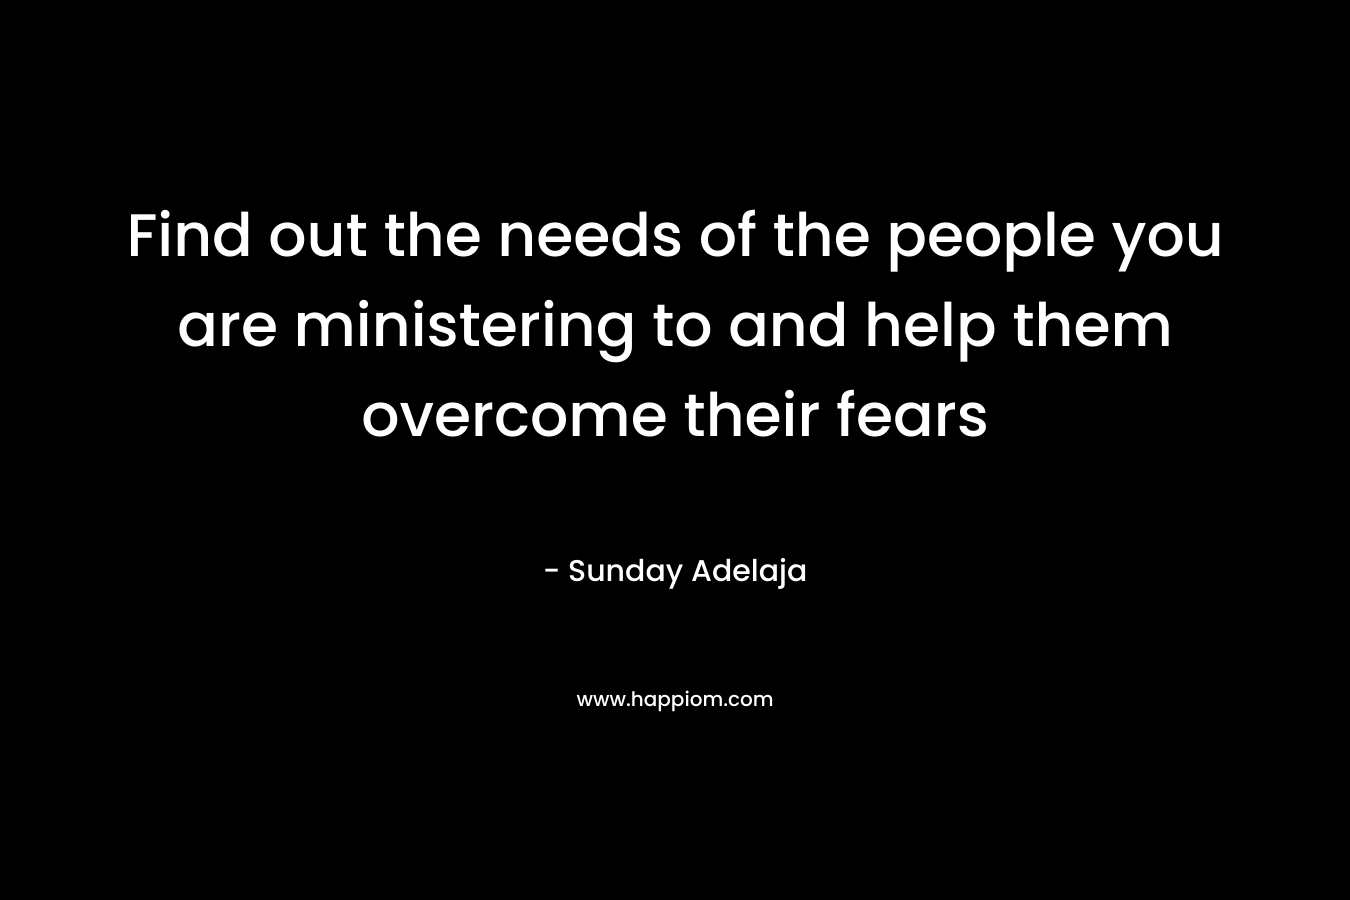 Find out the needs of the people you are ministering to and help them overcome their fears – Sunday Adelaja